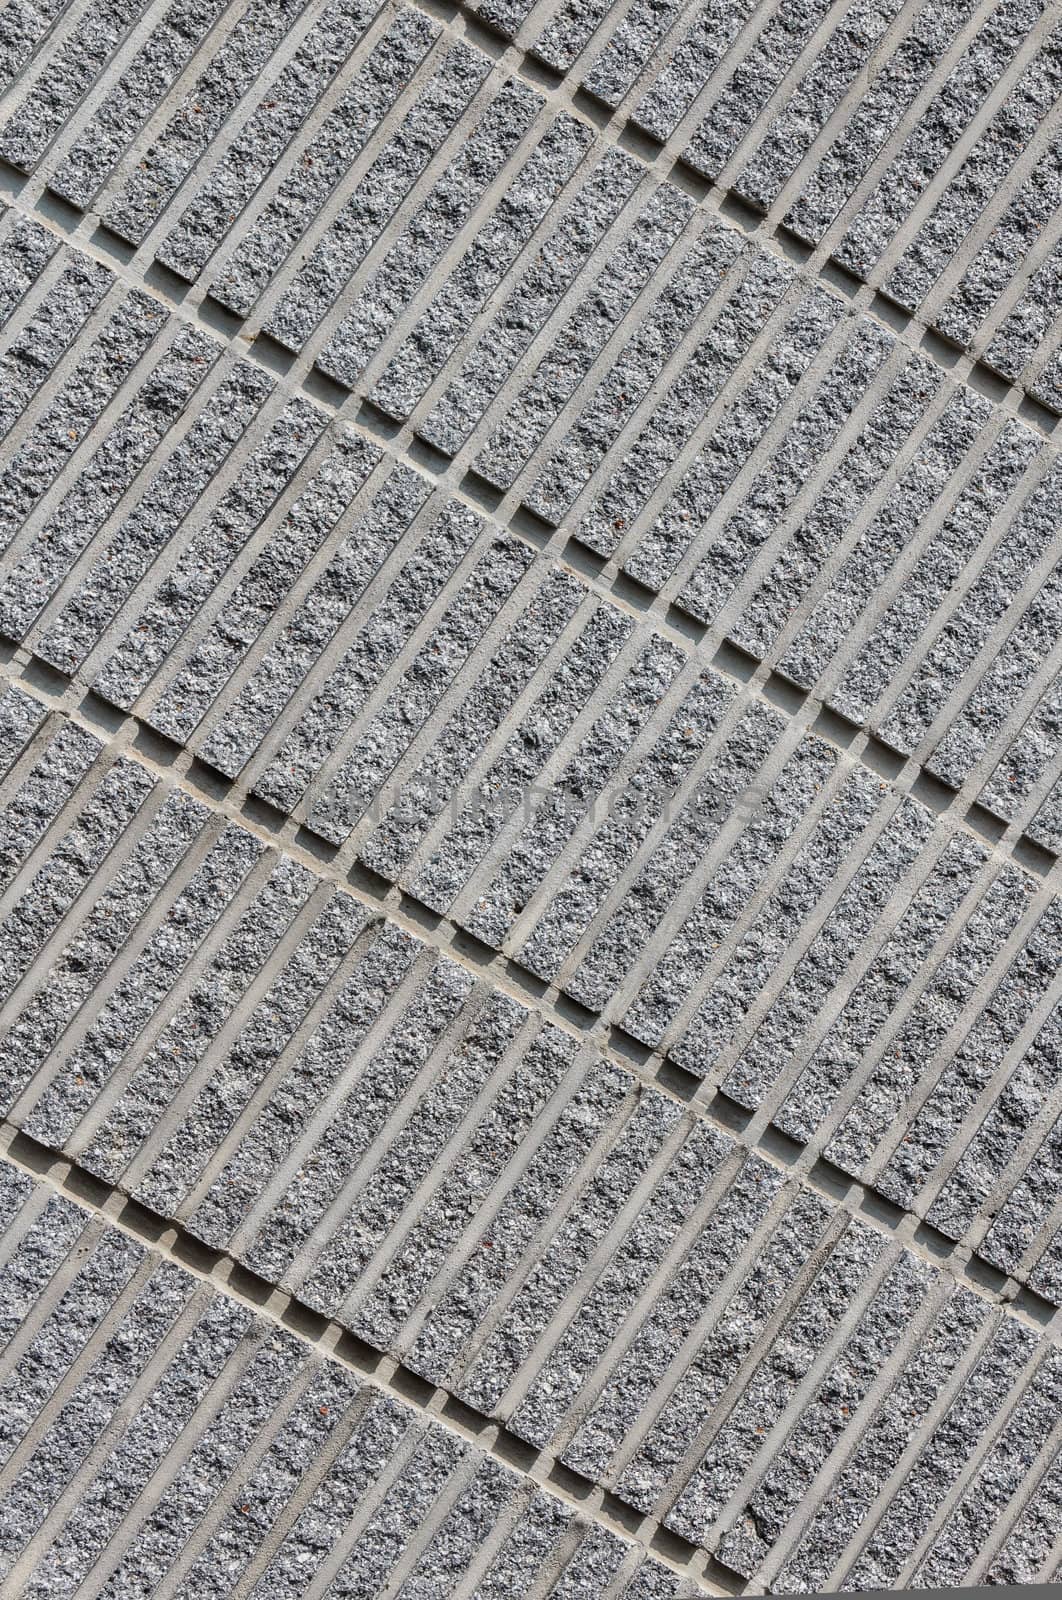 Corrugated concrete background showing Pattern of diagonal lines with shadow